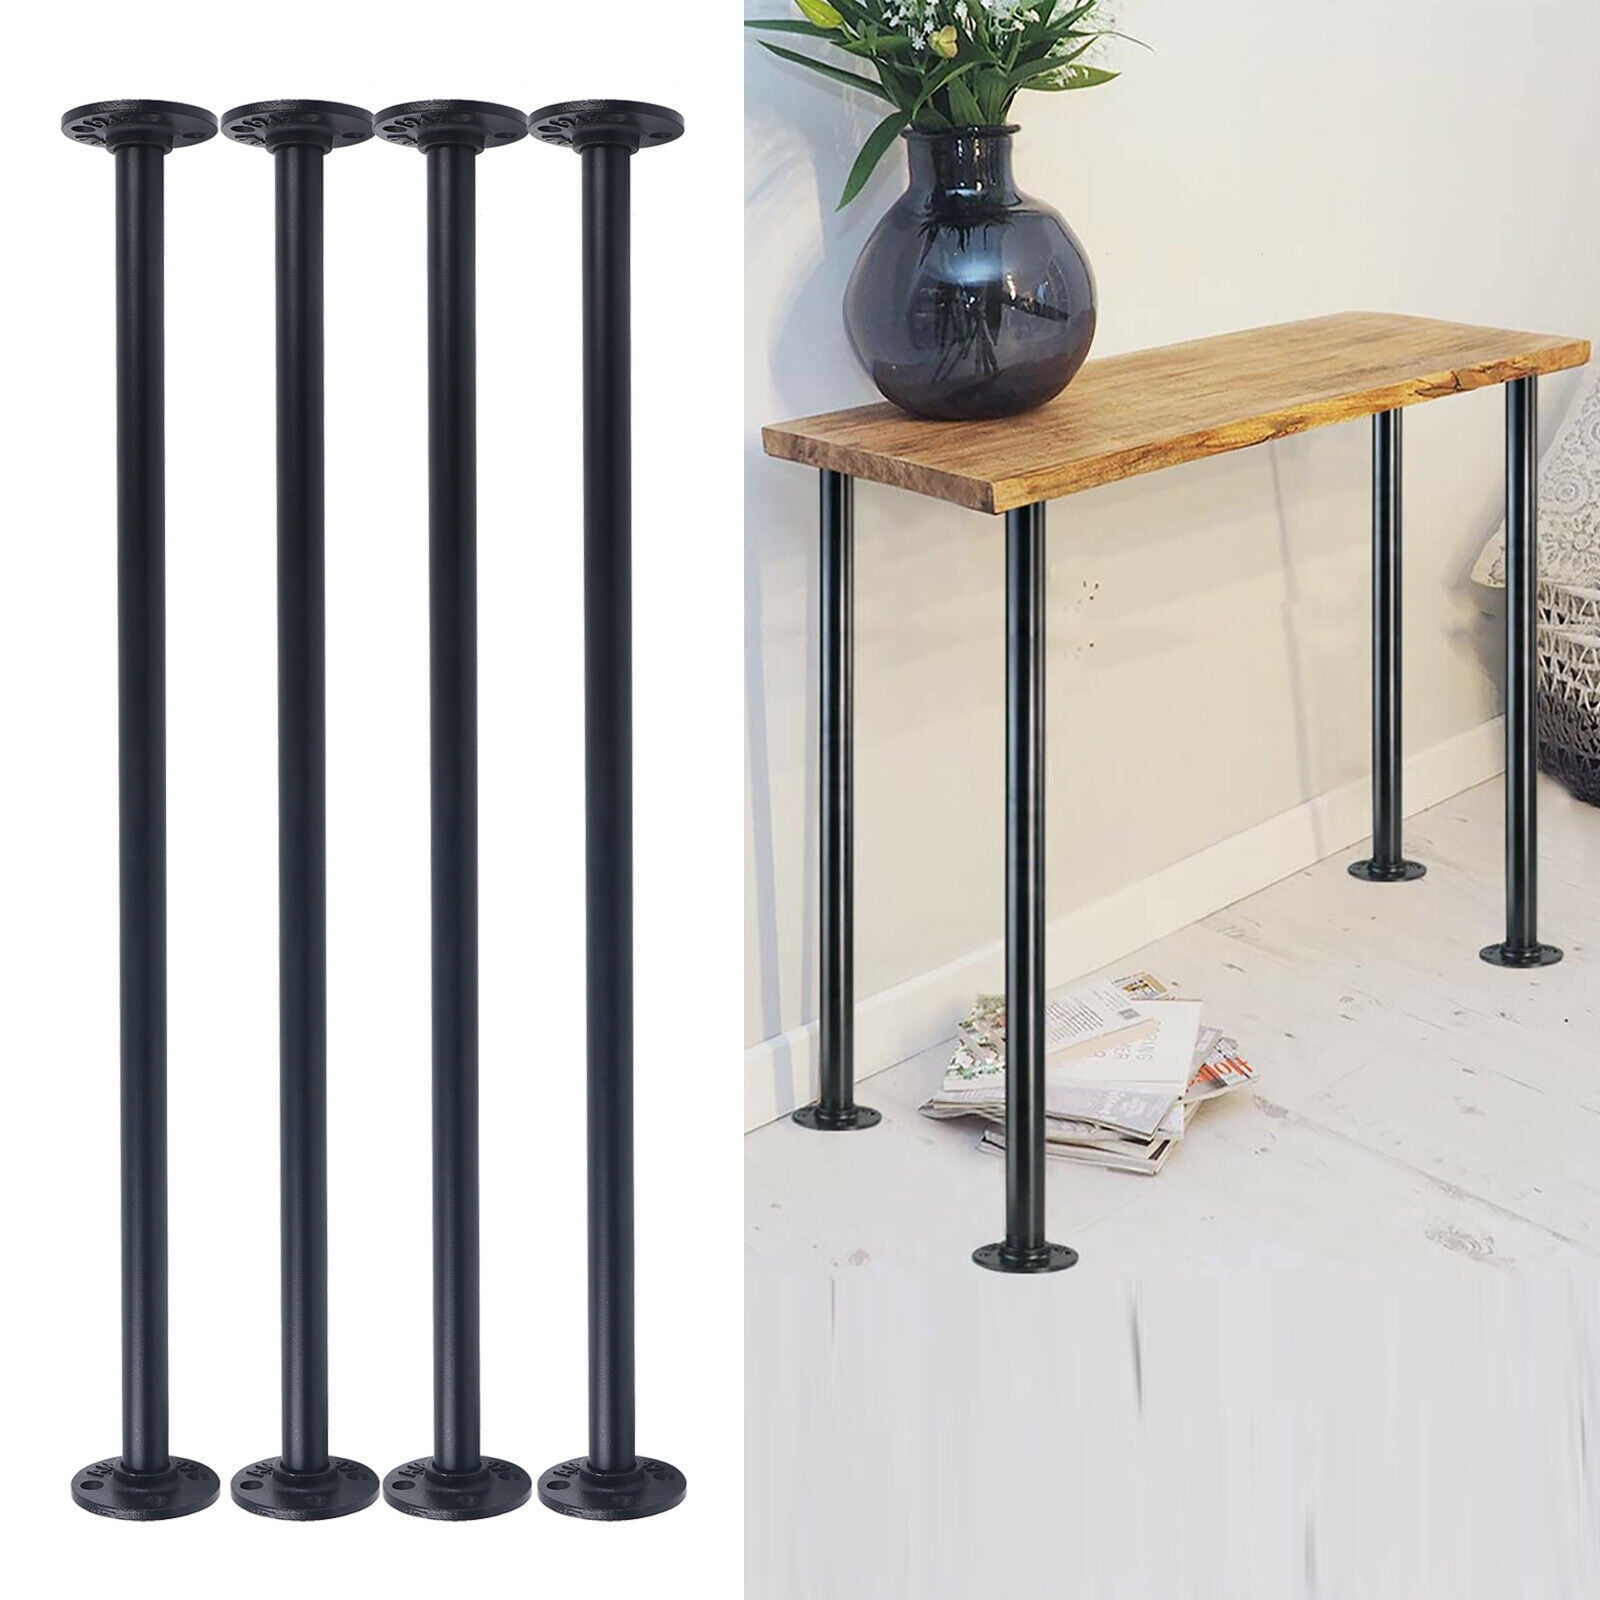 OUKANING 4Pcs 28'' Folding Hairpin Table Legs Solid Iron Folding